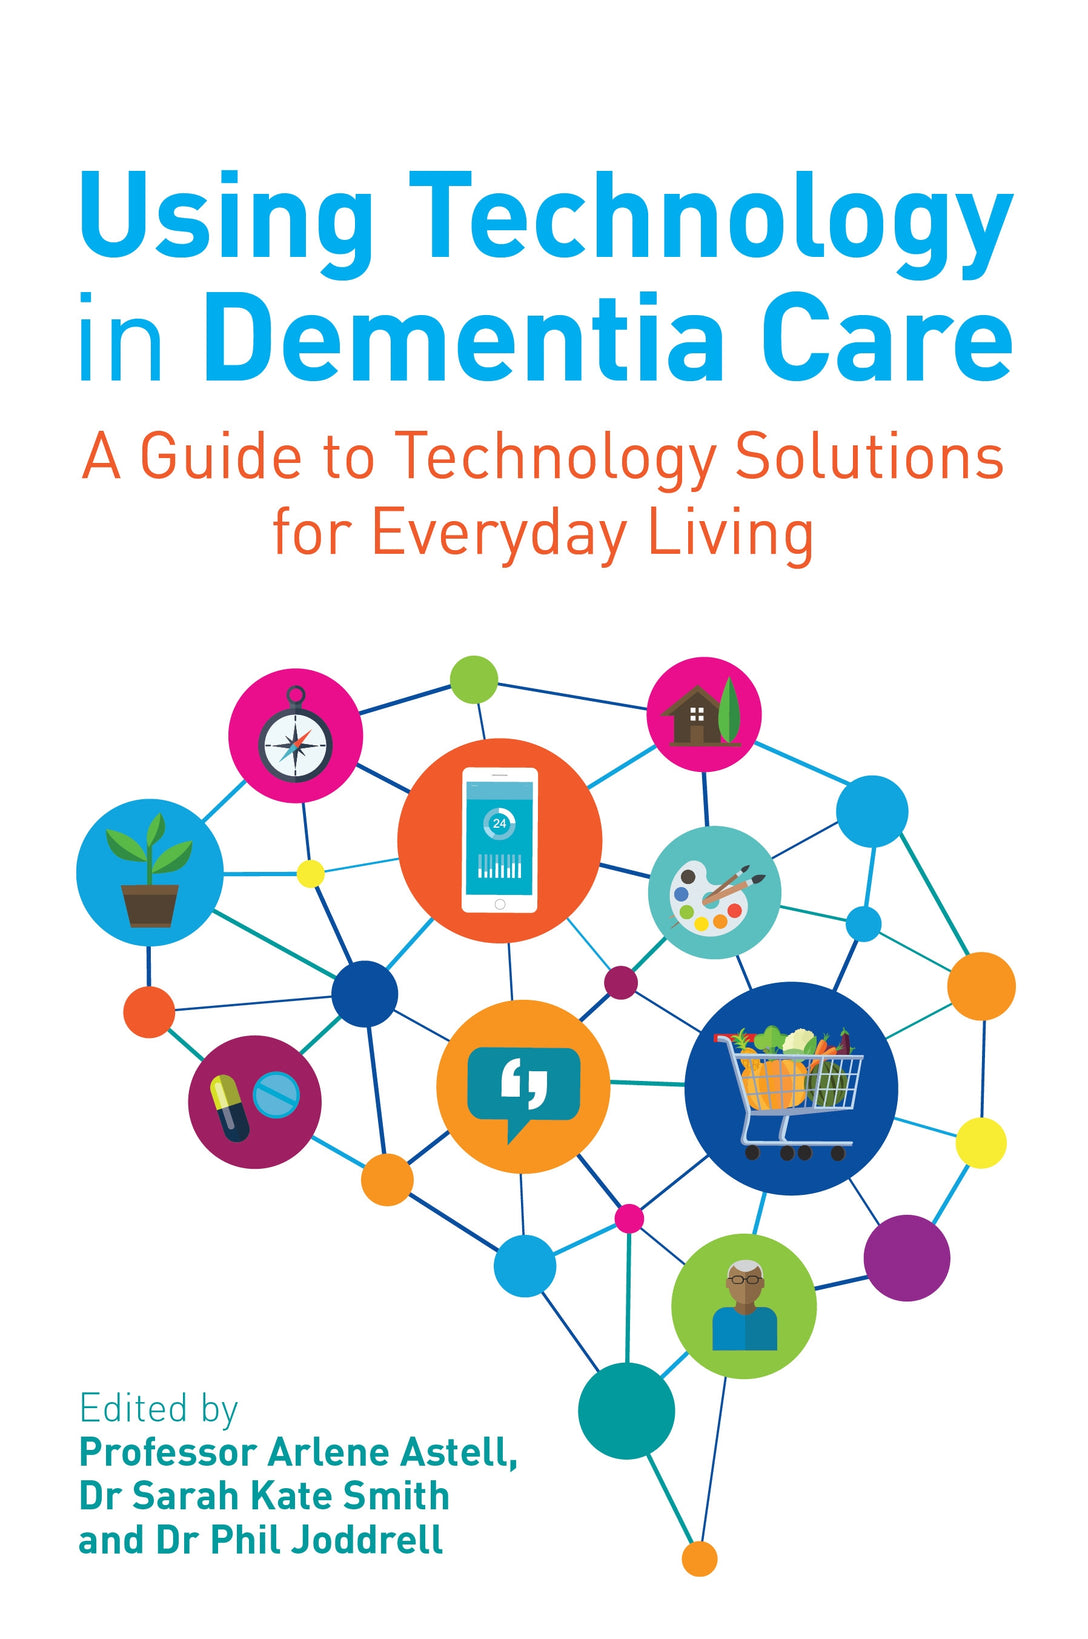 Using Technology in Dementia Care by Arlene Astell, Sarah Smith, Phil Joddrell, No Author Listed